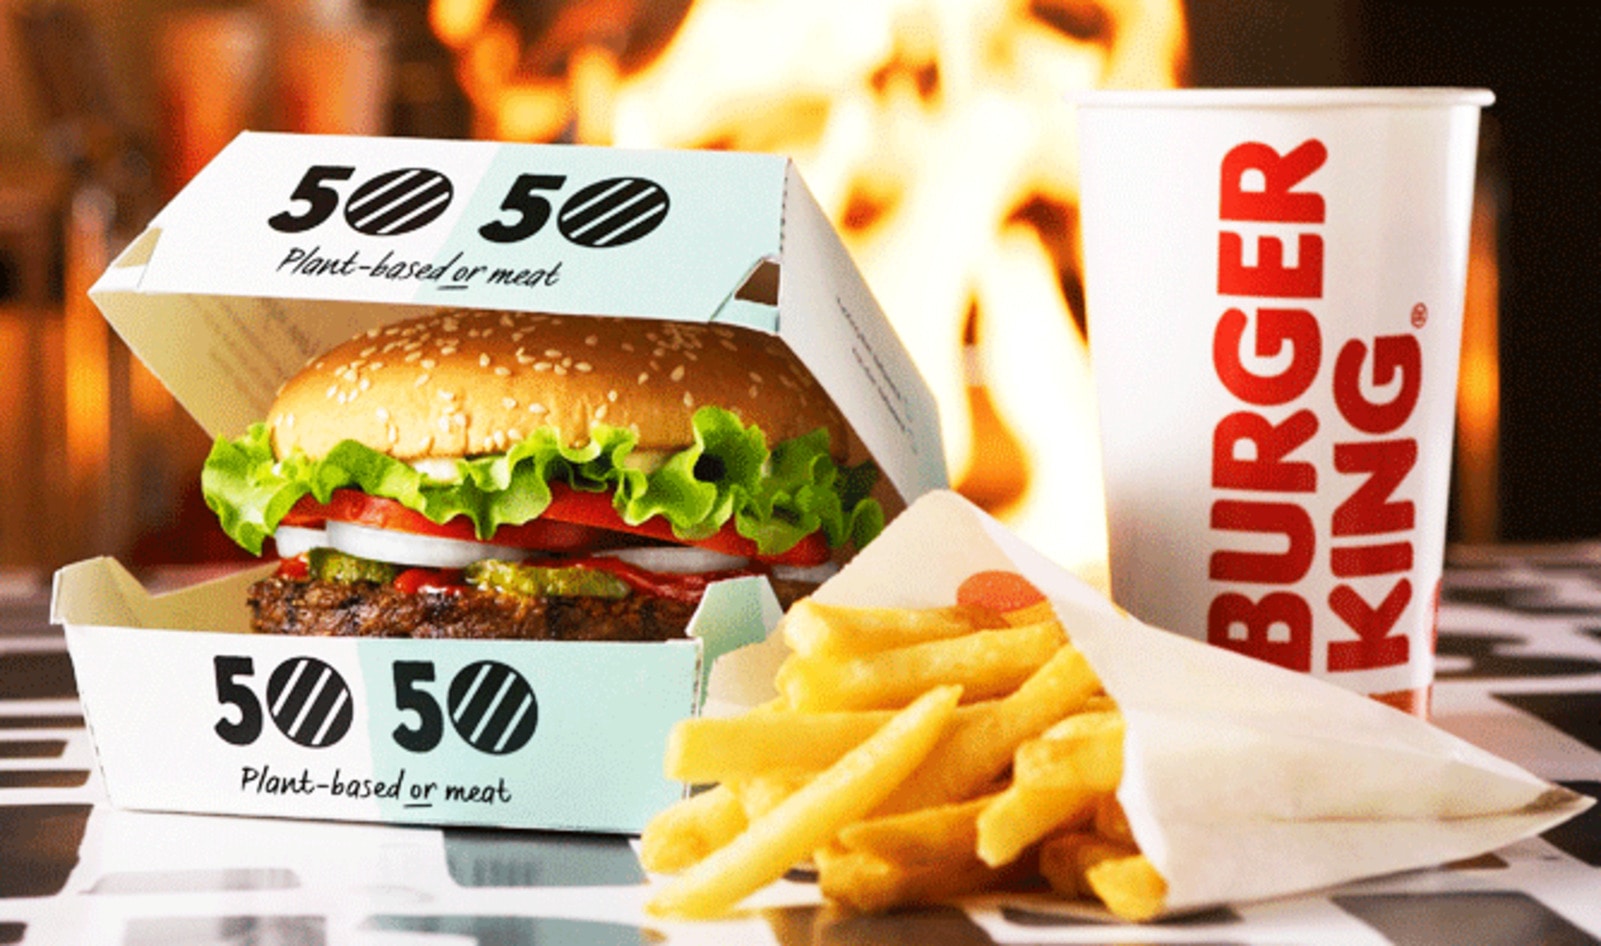 Burger King Sweden Confident Meatless Whopper Mimics Meat, Dares Customers to Order Blindly&nbsp;